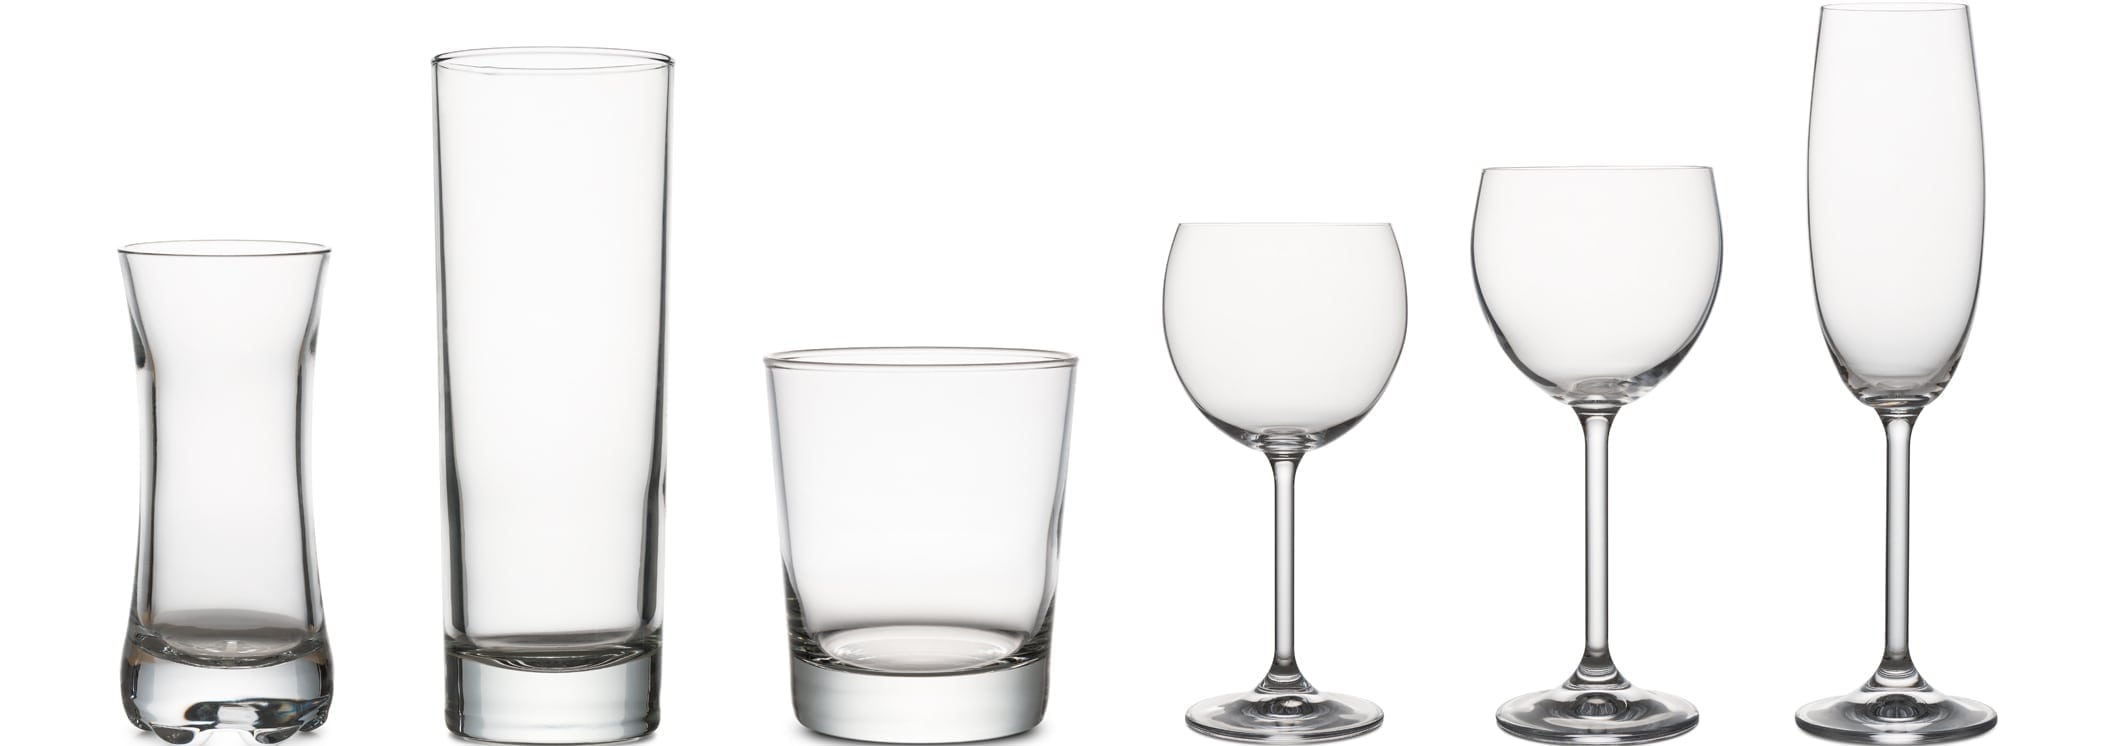 variety of classical glass for wine and water empty, on white background